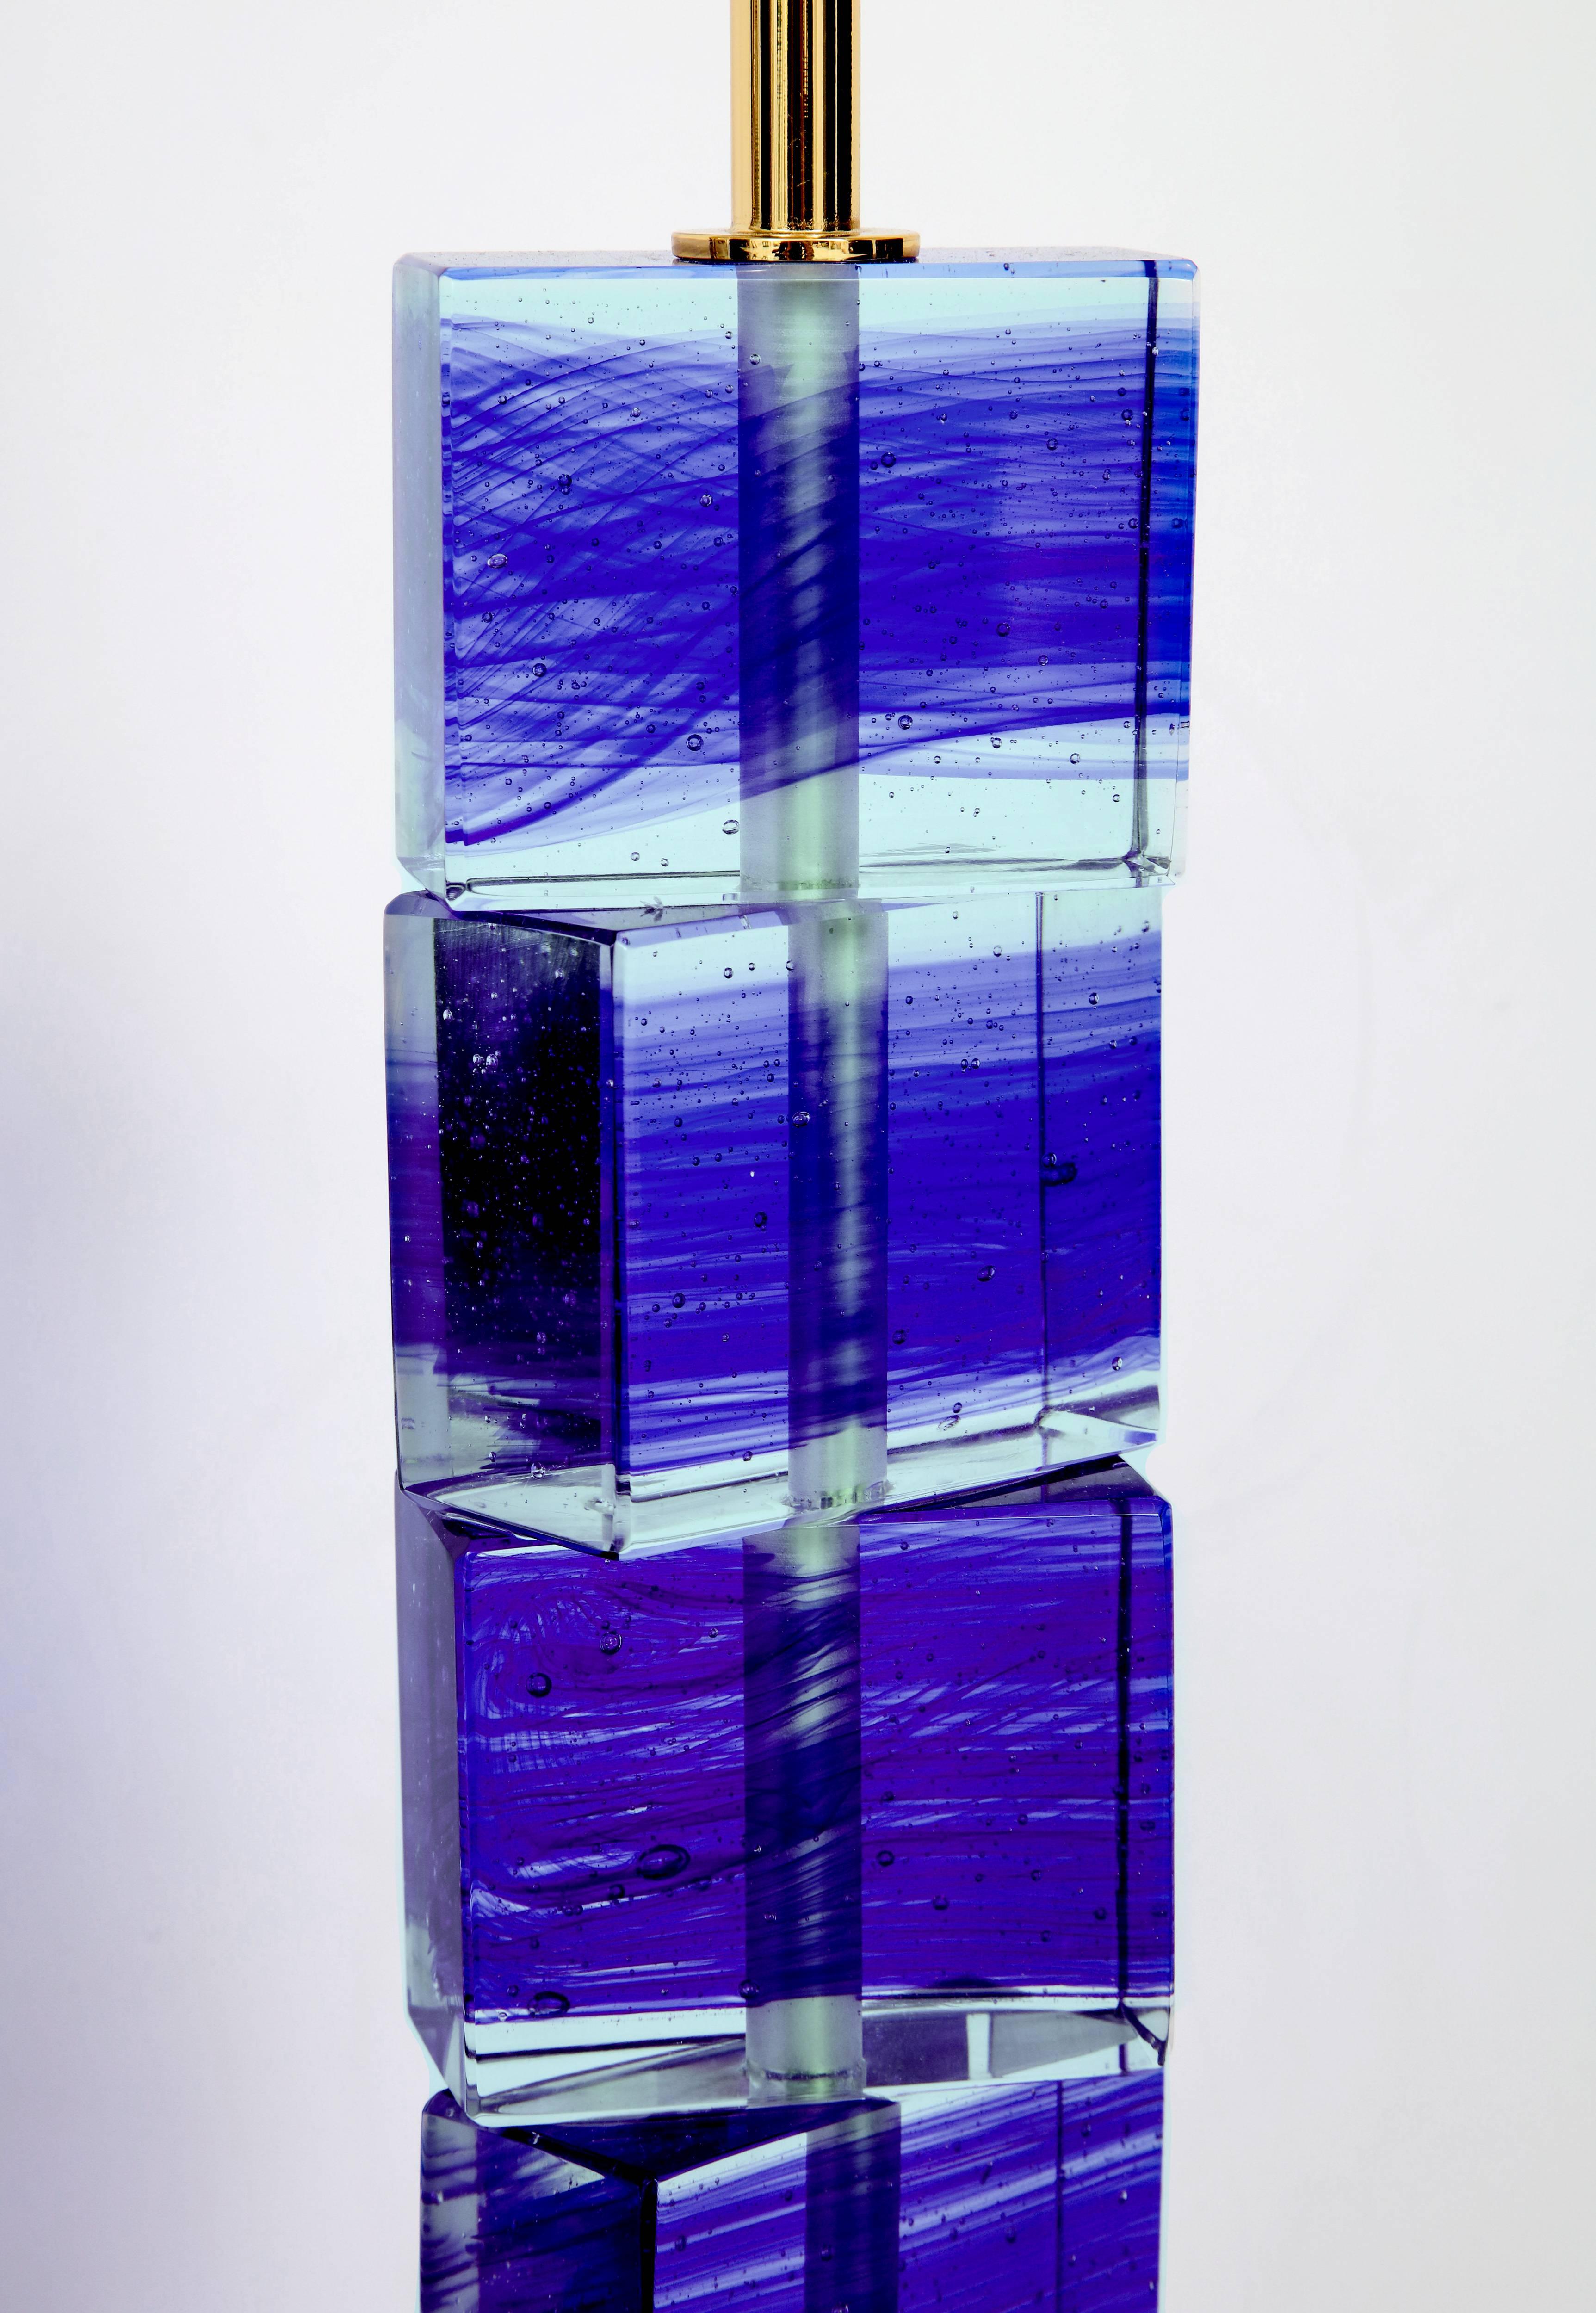 Pair of Italian cobalt blue and clear Murano glass block lamps with solid glass base. The solid blocks on the base swivel to create numerous configurations. The color of the glass can become deeper or lighter depending on the surroundings. These